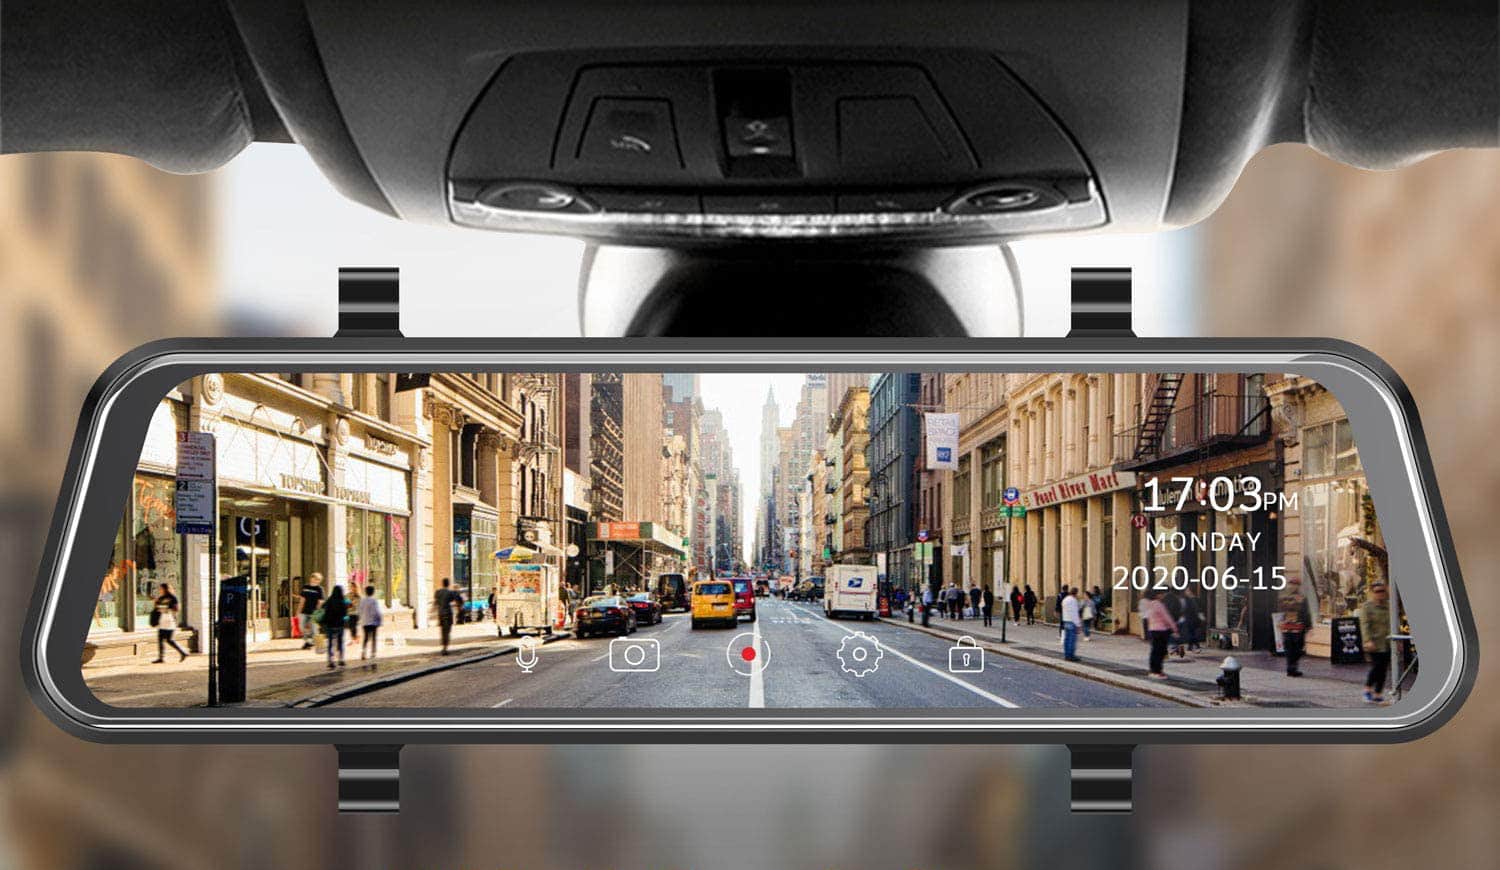 Top 10 Best Mirror dash cams in 2021 Reviews  Guide